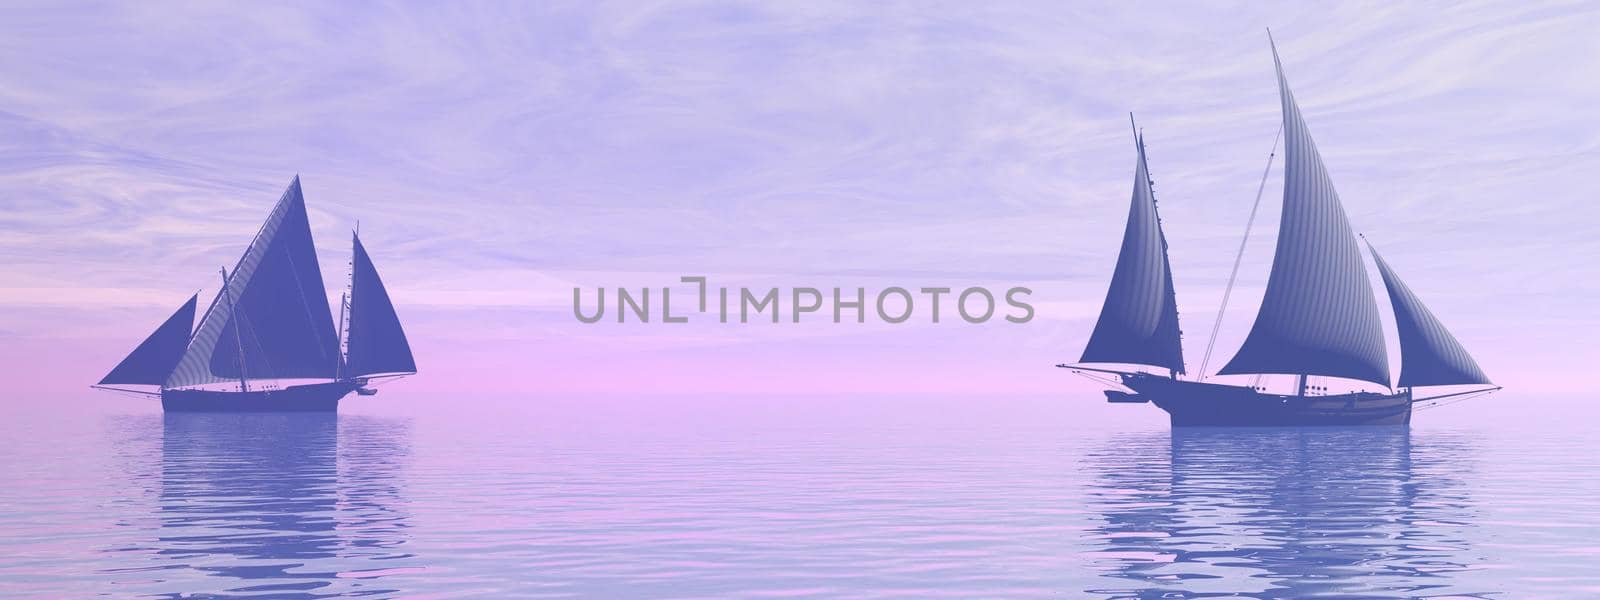 very beautiful old boat traveling on the sea - 3d rendering by mariephotos